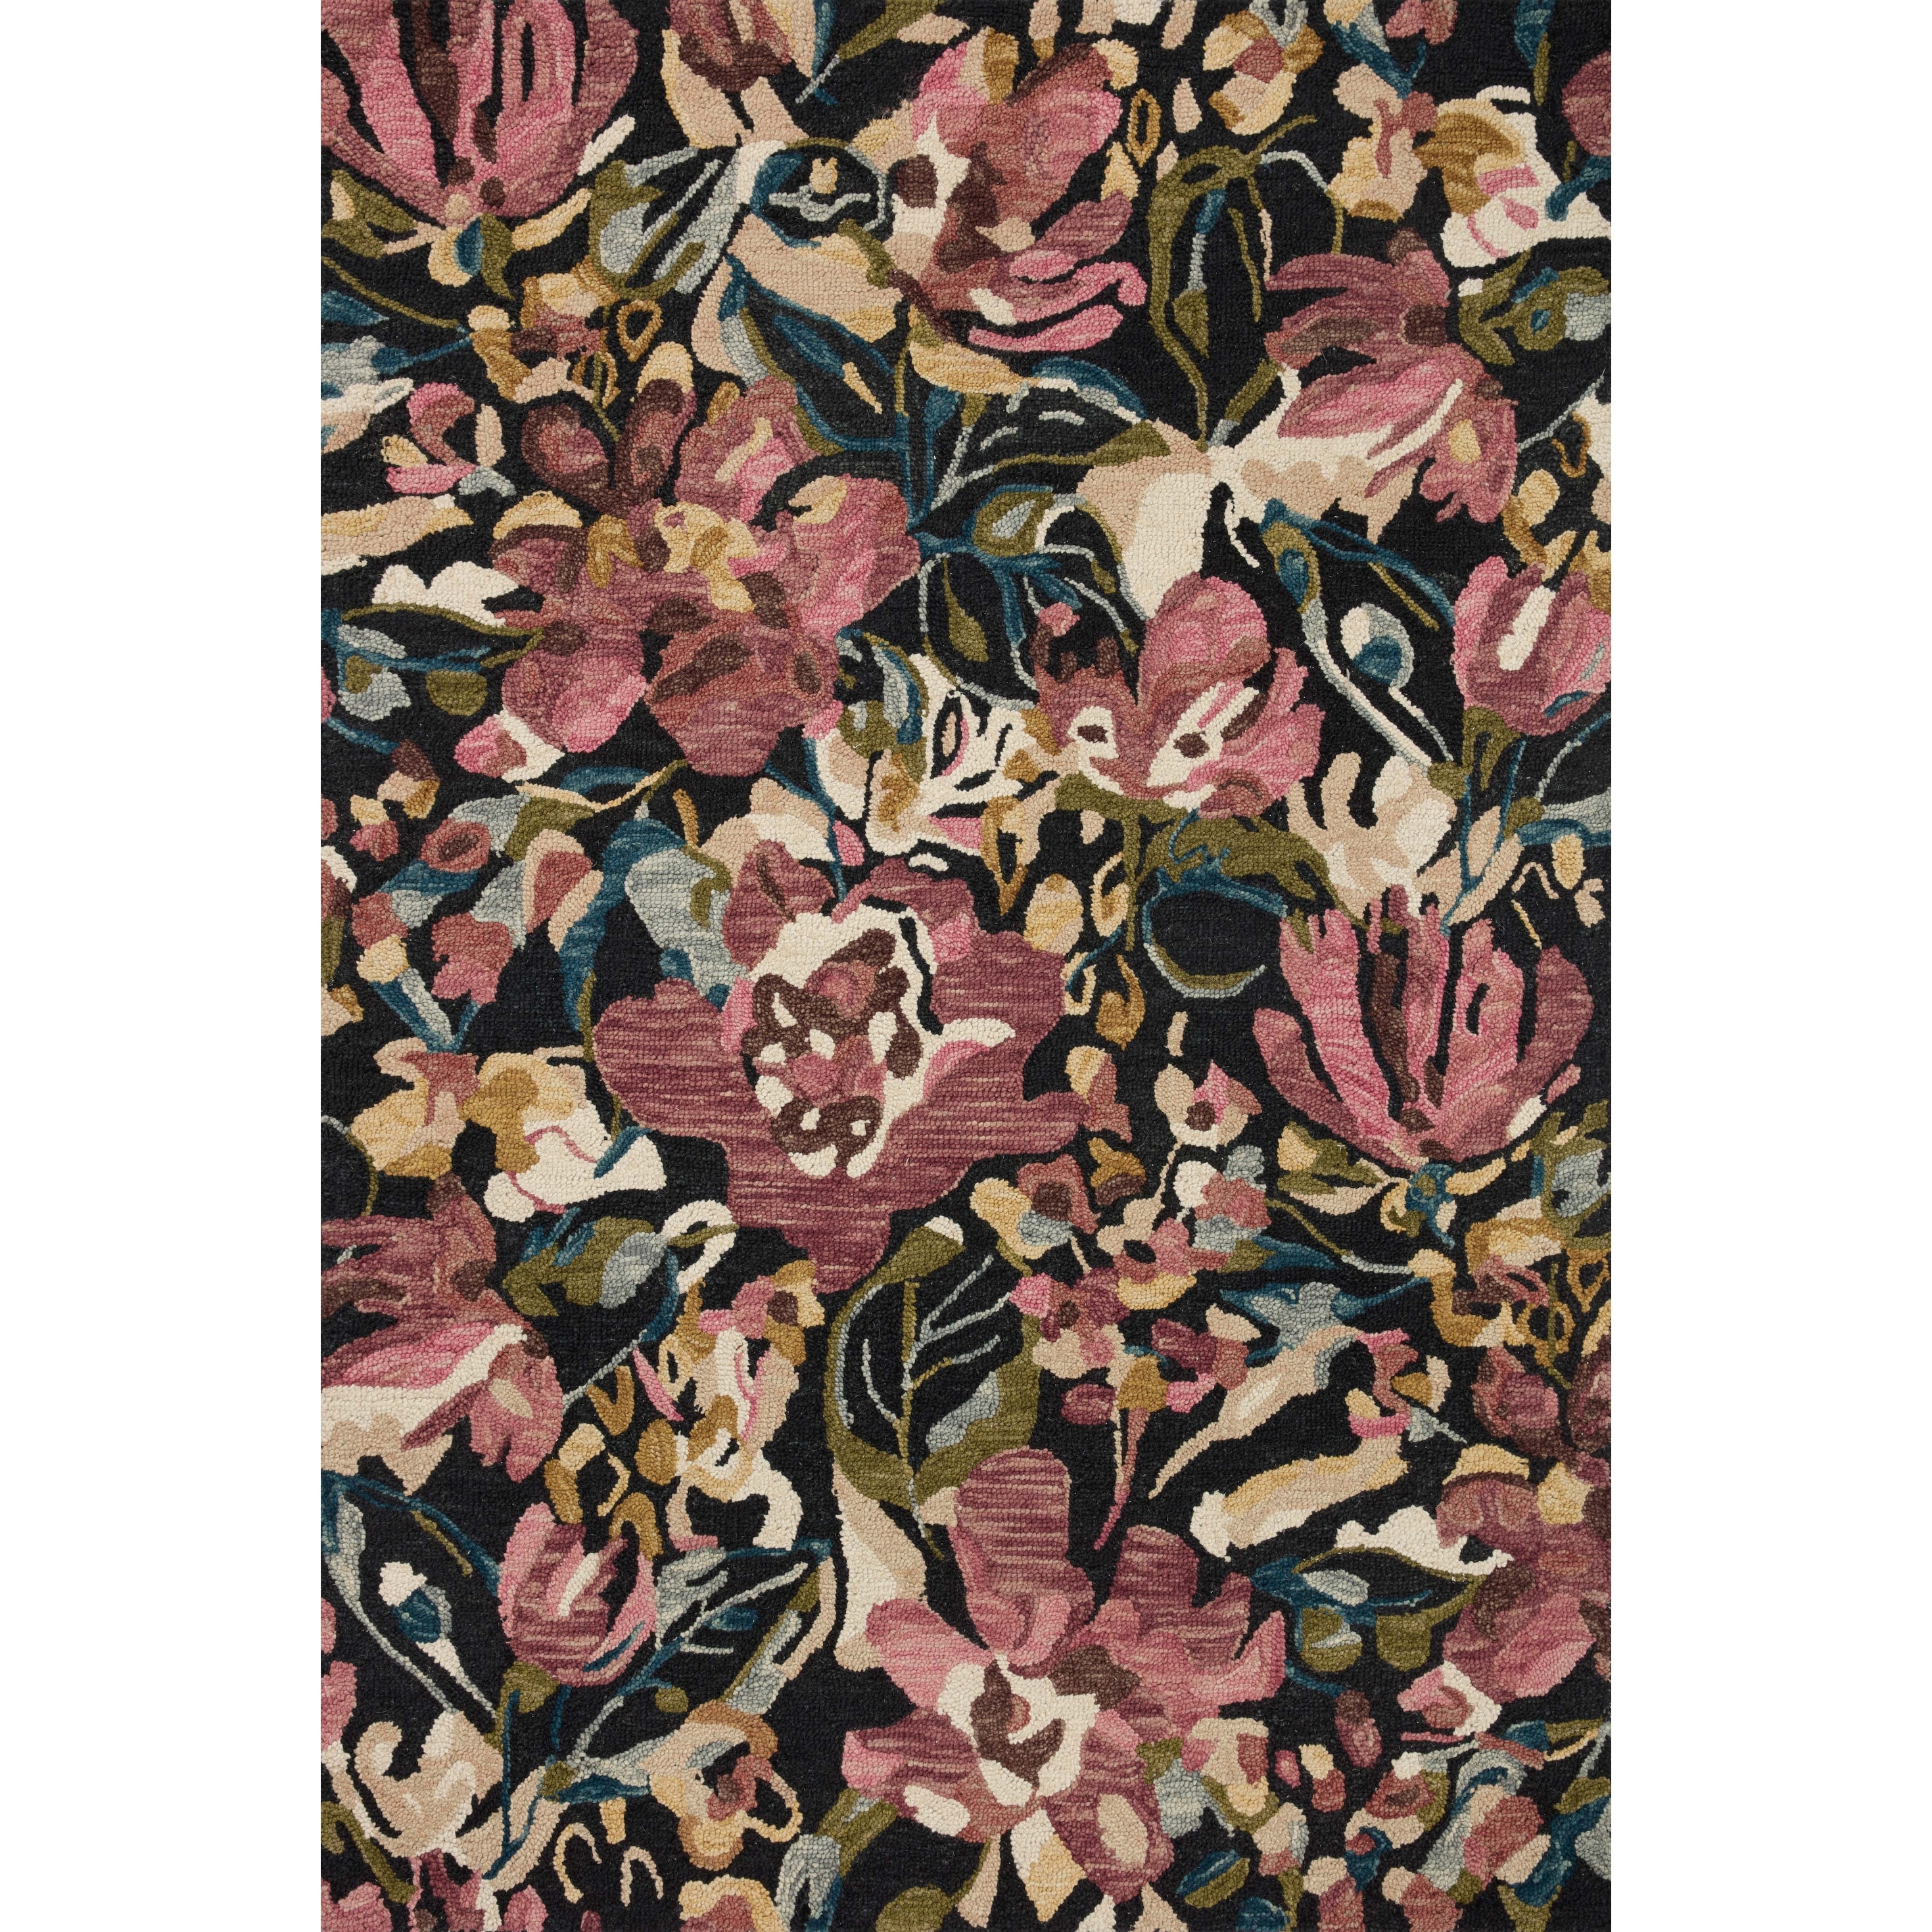 https://ak1.ostkcdn.com/images/products/is/images/direct/69c2d69ecbe60ac58596e14ea274658ad8d560bd/Alexander-Home-Evelyn-Floral-Bouquet-Area-Rug.jpg